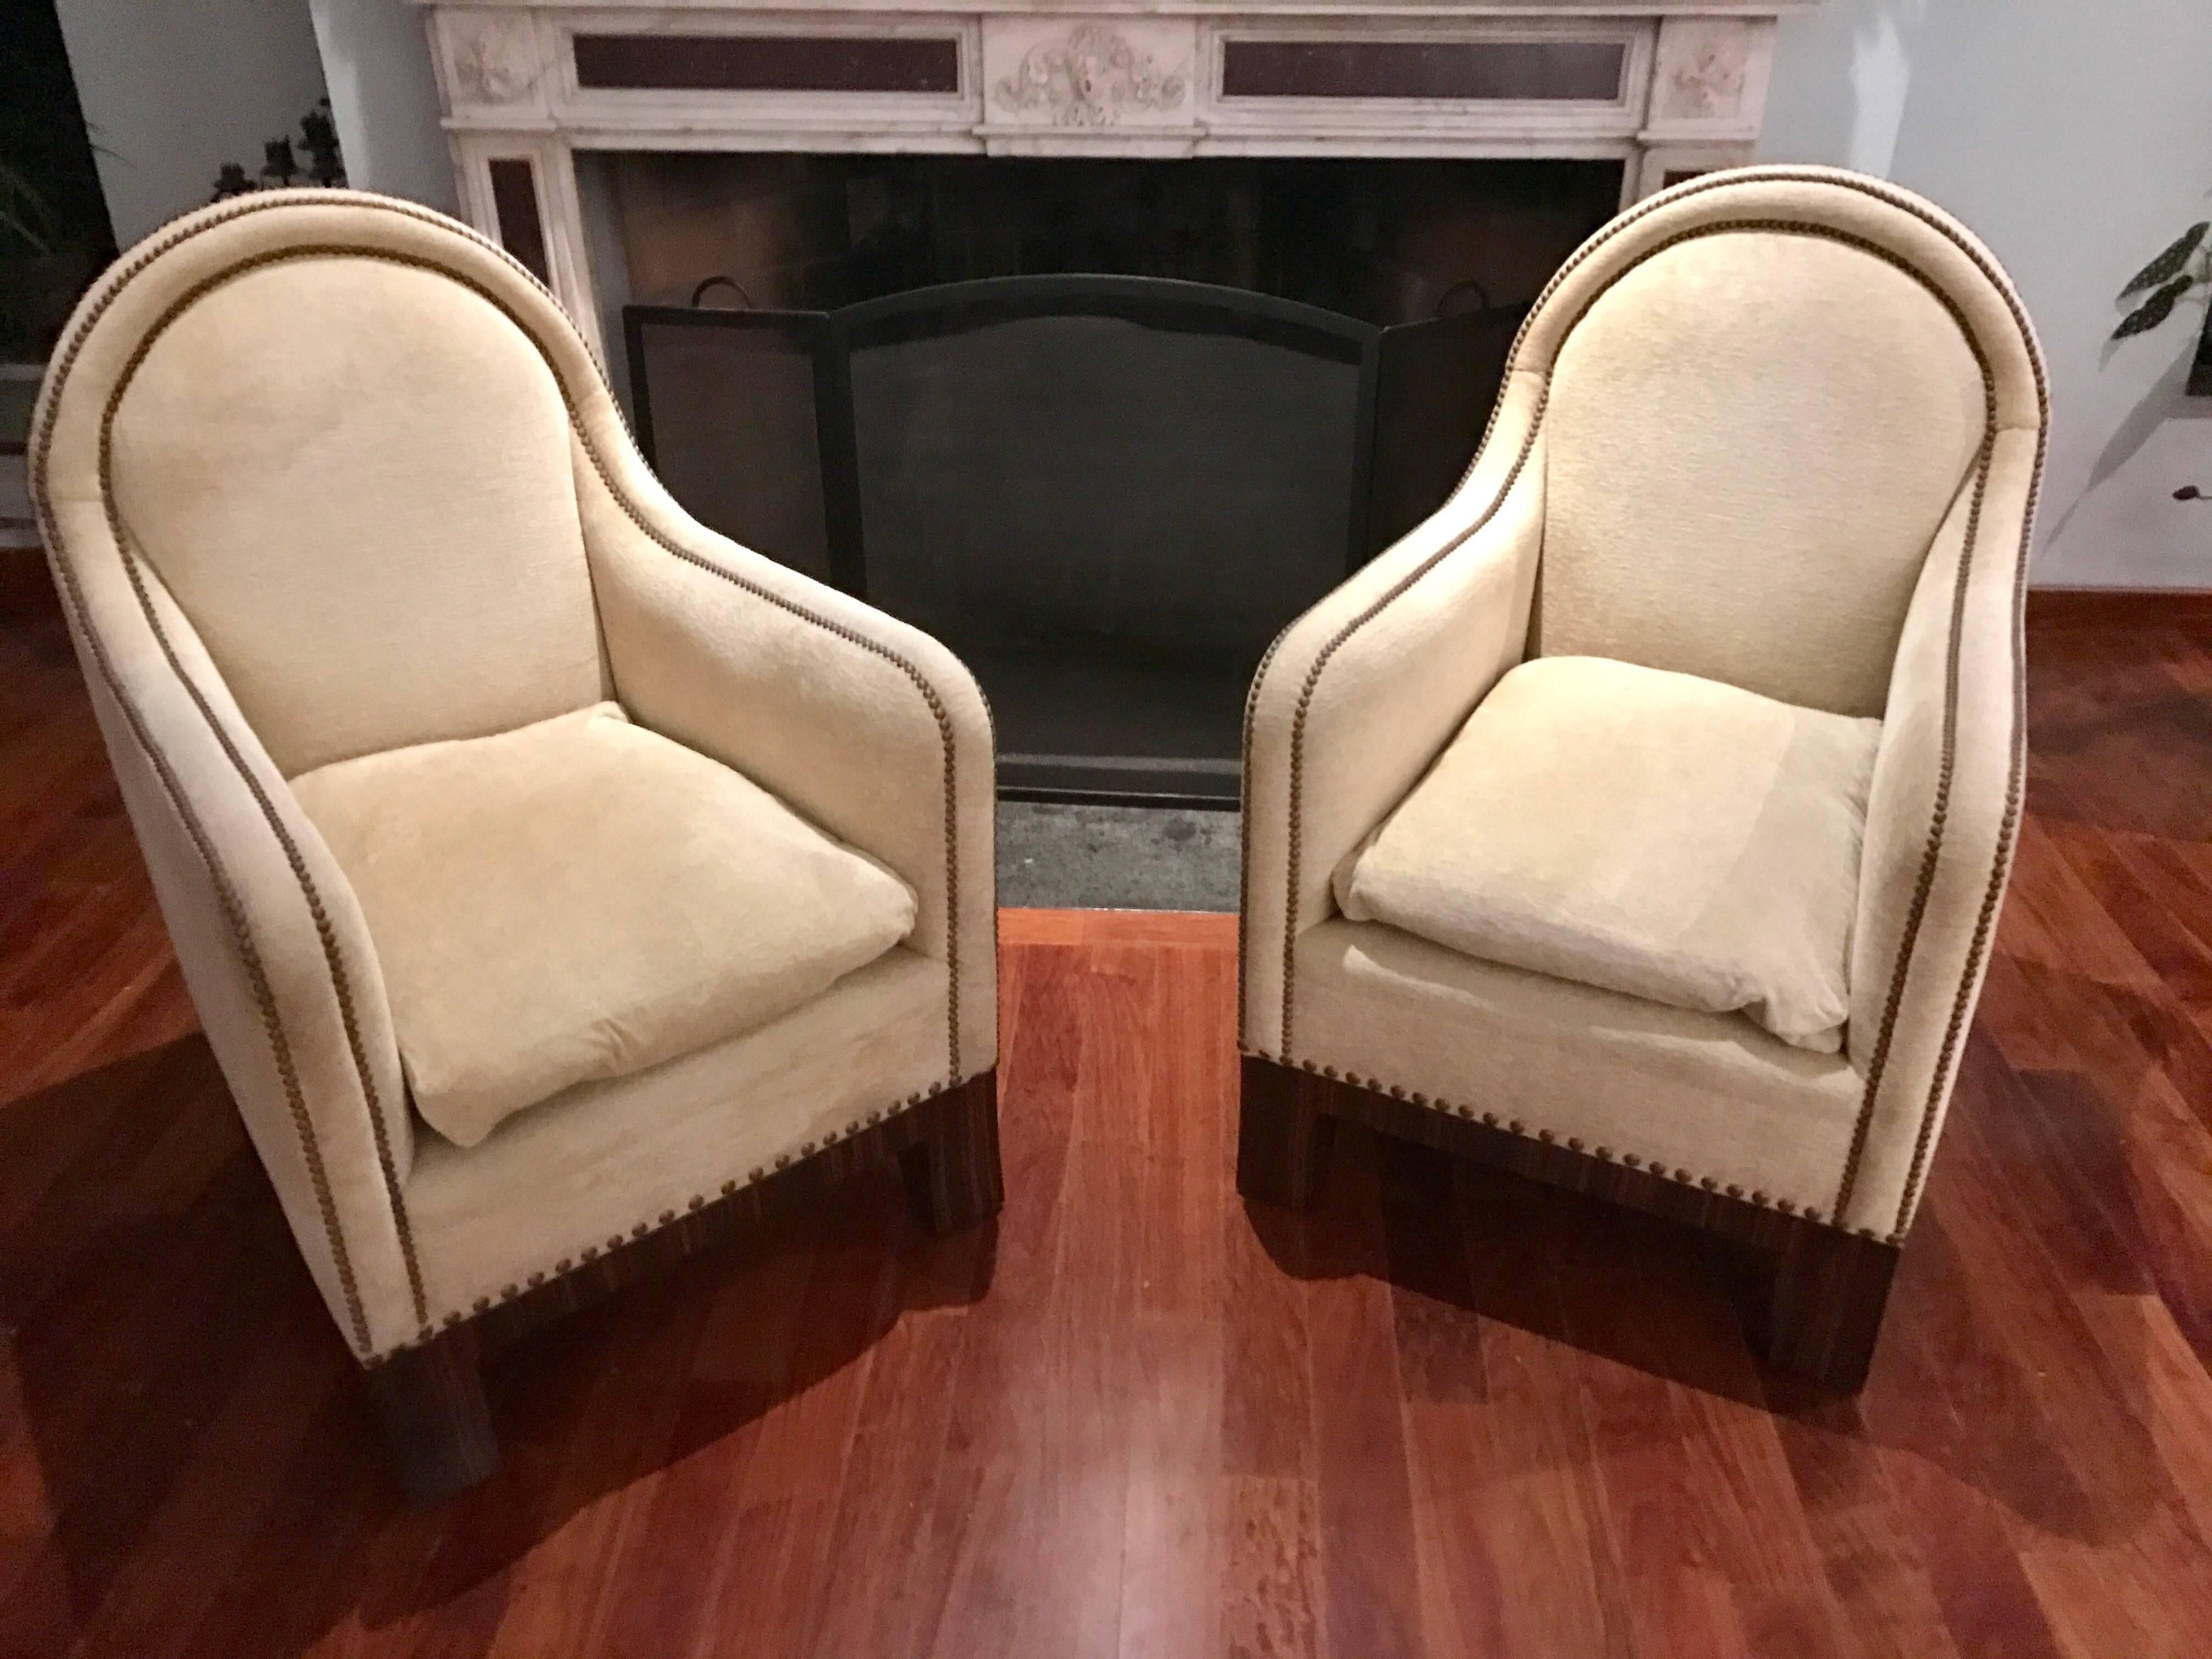 This elegant Pair of Mid-Century Modern Lounge Chairs with their high backs and deep seats are the place to mingle.
Once you sit down it will be hard to get up again.
The Rosewood veneered feet and brass tacks give them there stylish looks. 
     